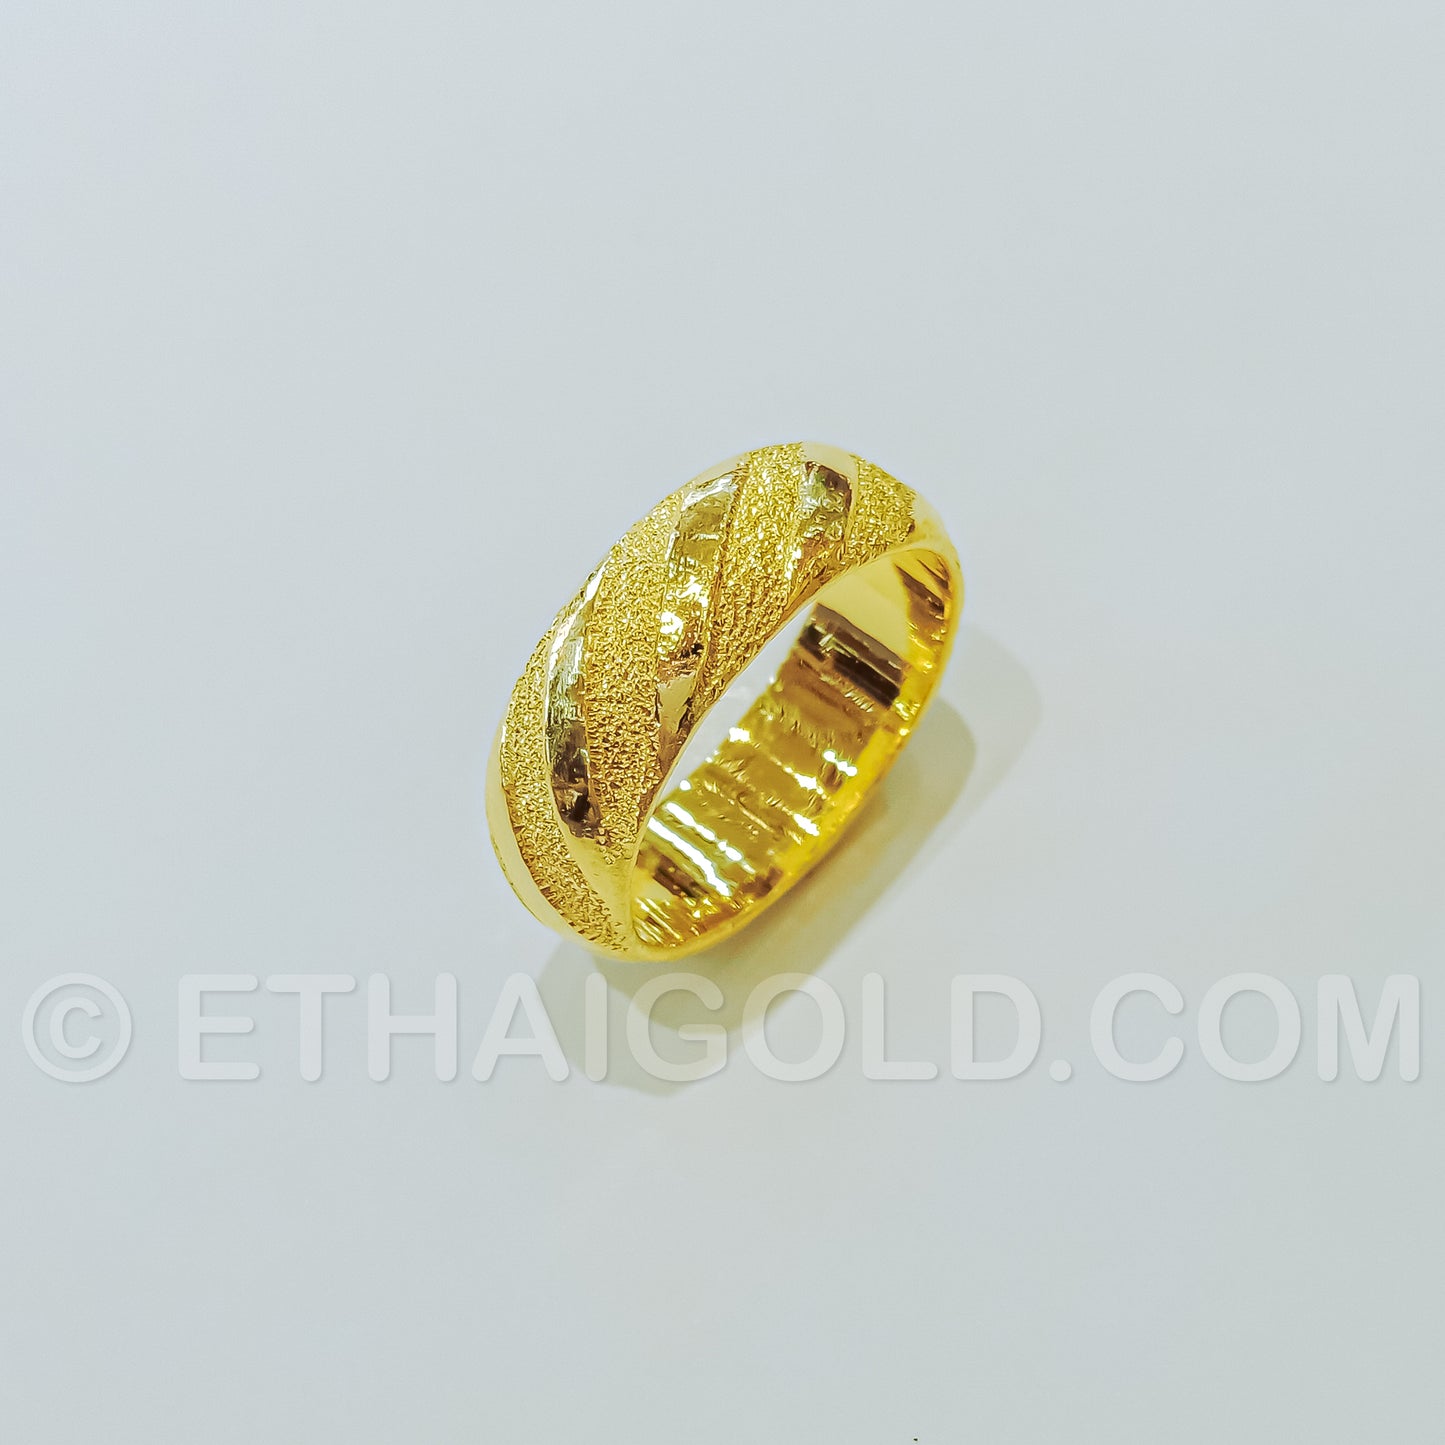 1/8 BAHT POLISHED SPARKLING SOLID STRIPED DOMED WEDDING BAND RING IN 23K GOLD (ID: R010HS)